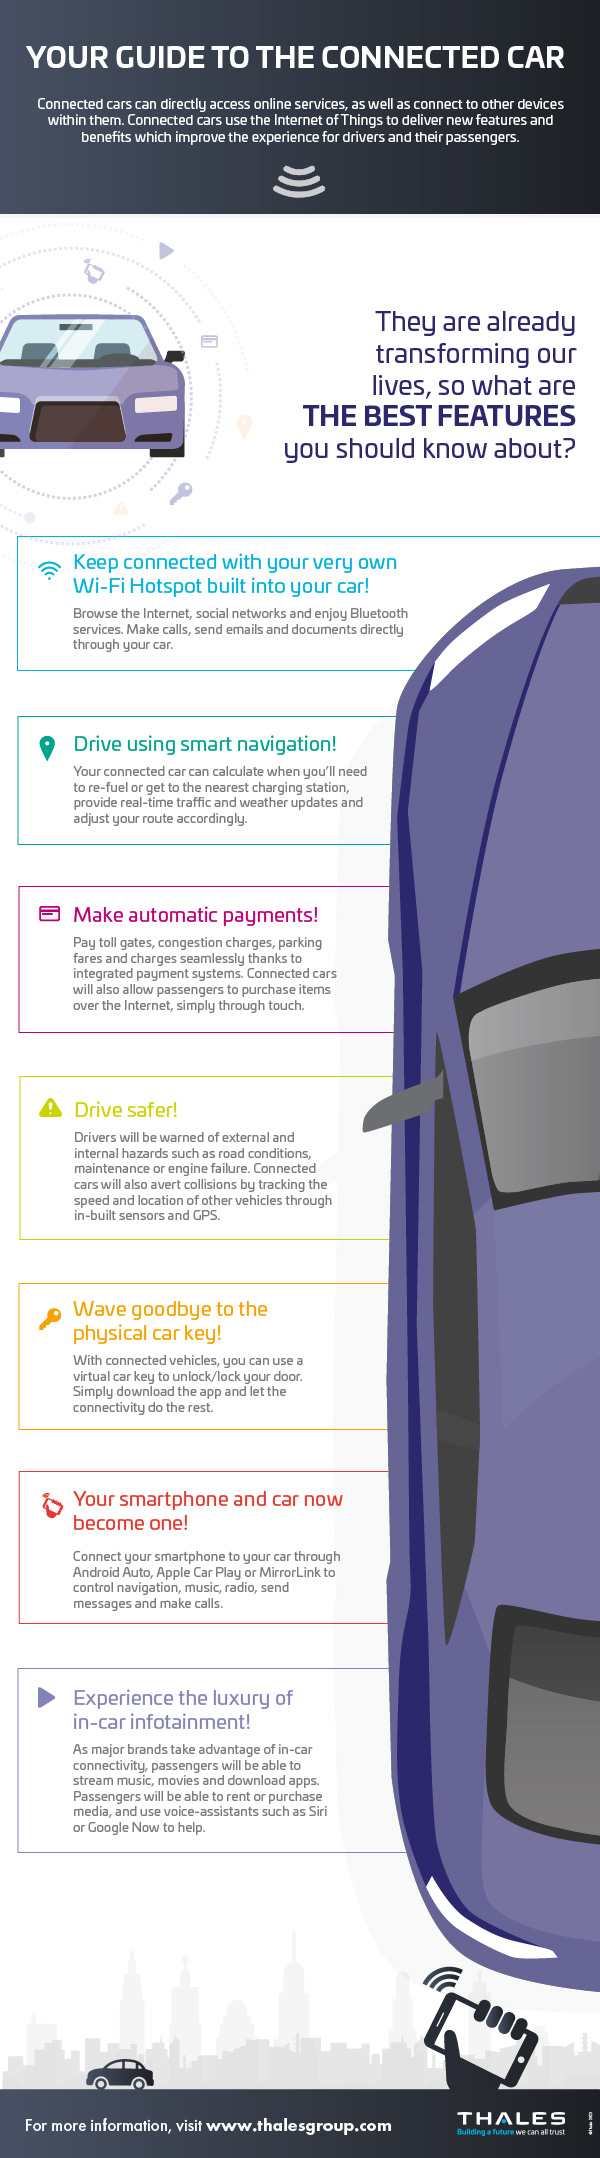 Your guide to the connected car